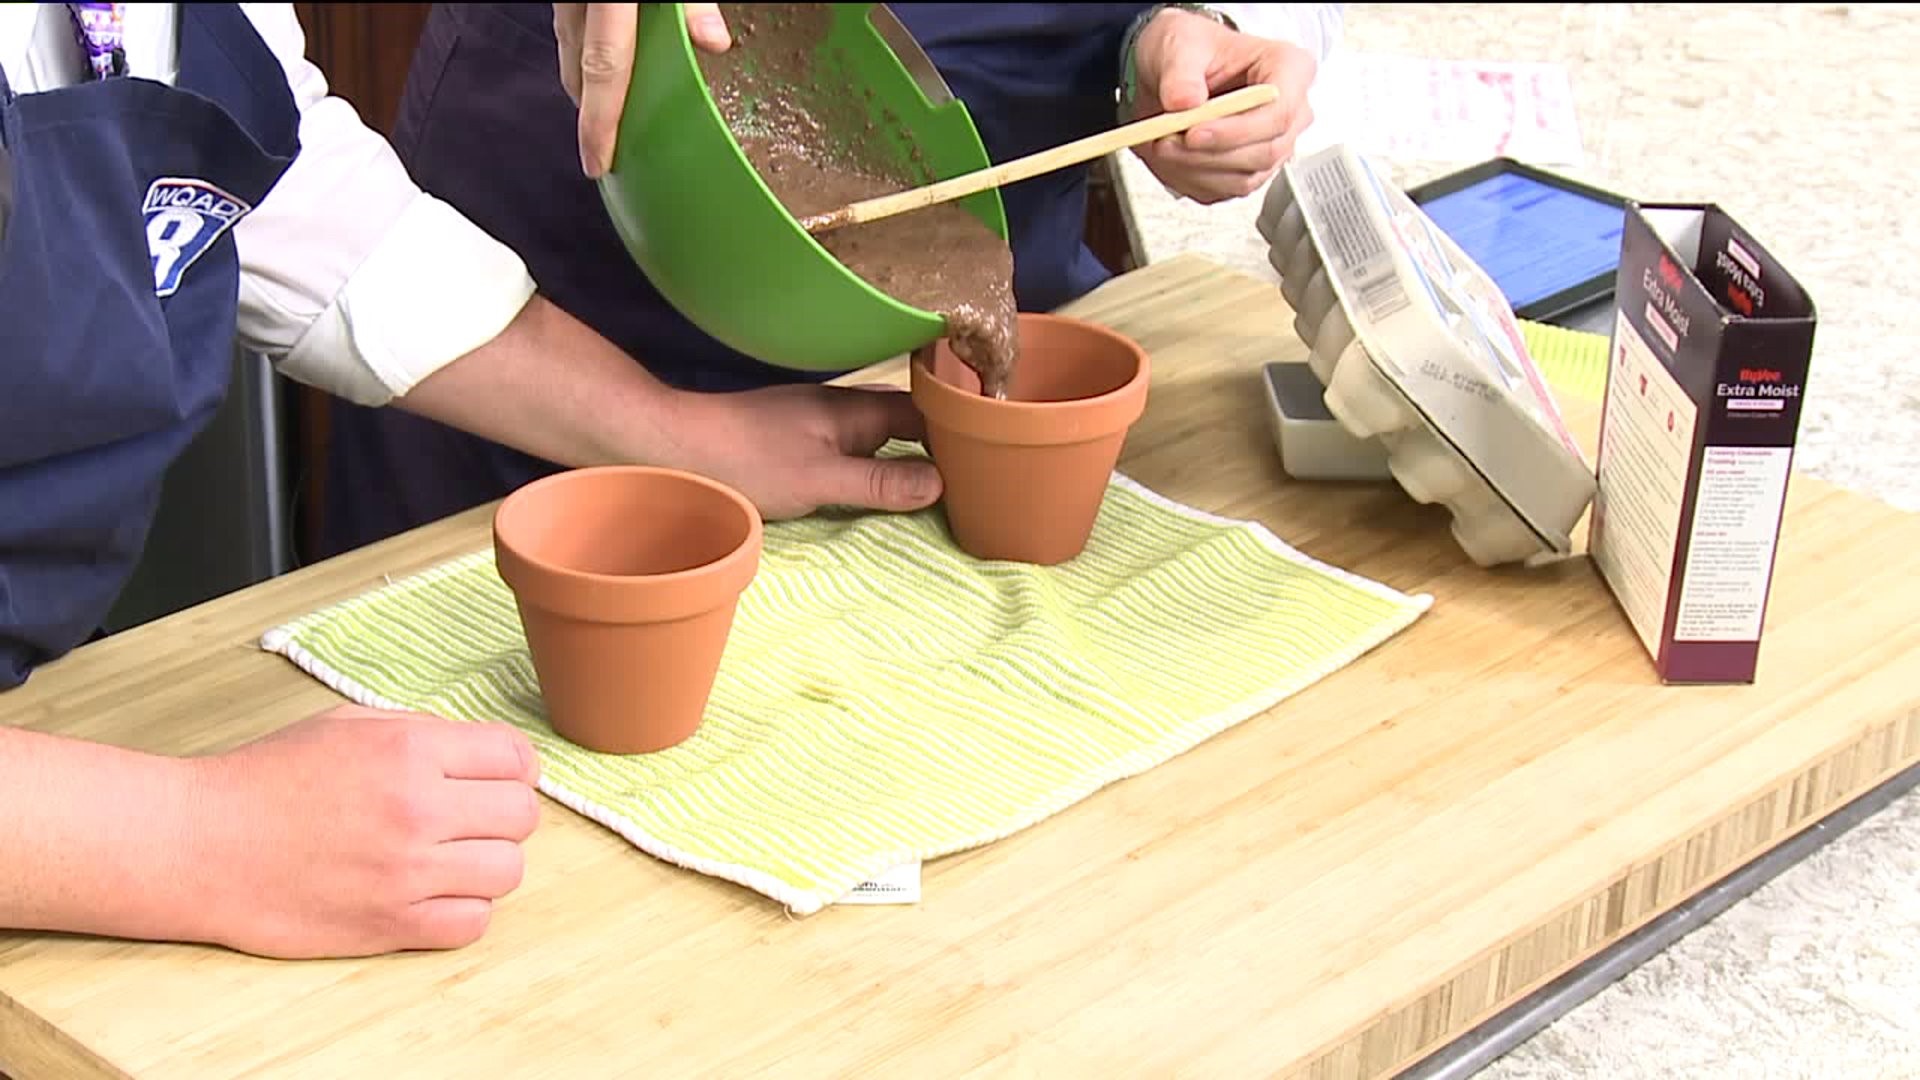 Nailed It Or Failed It: Part 1 of Flower Pot Cupcakes